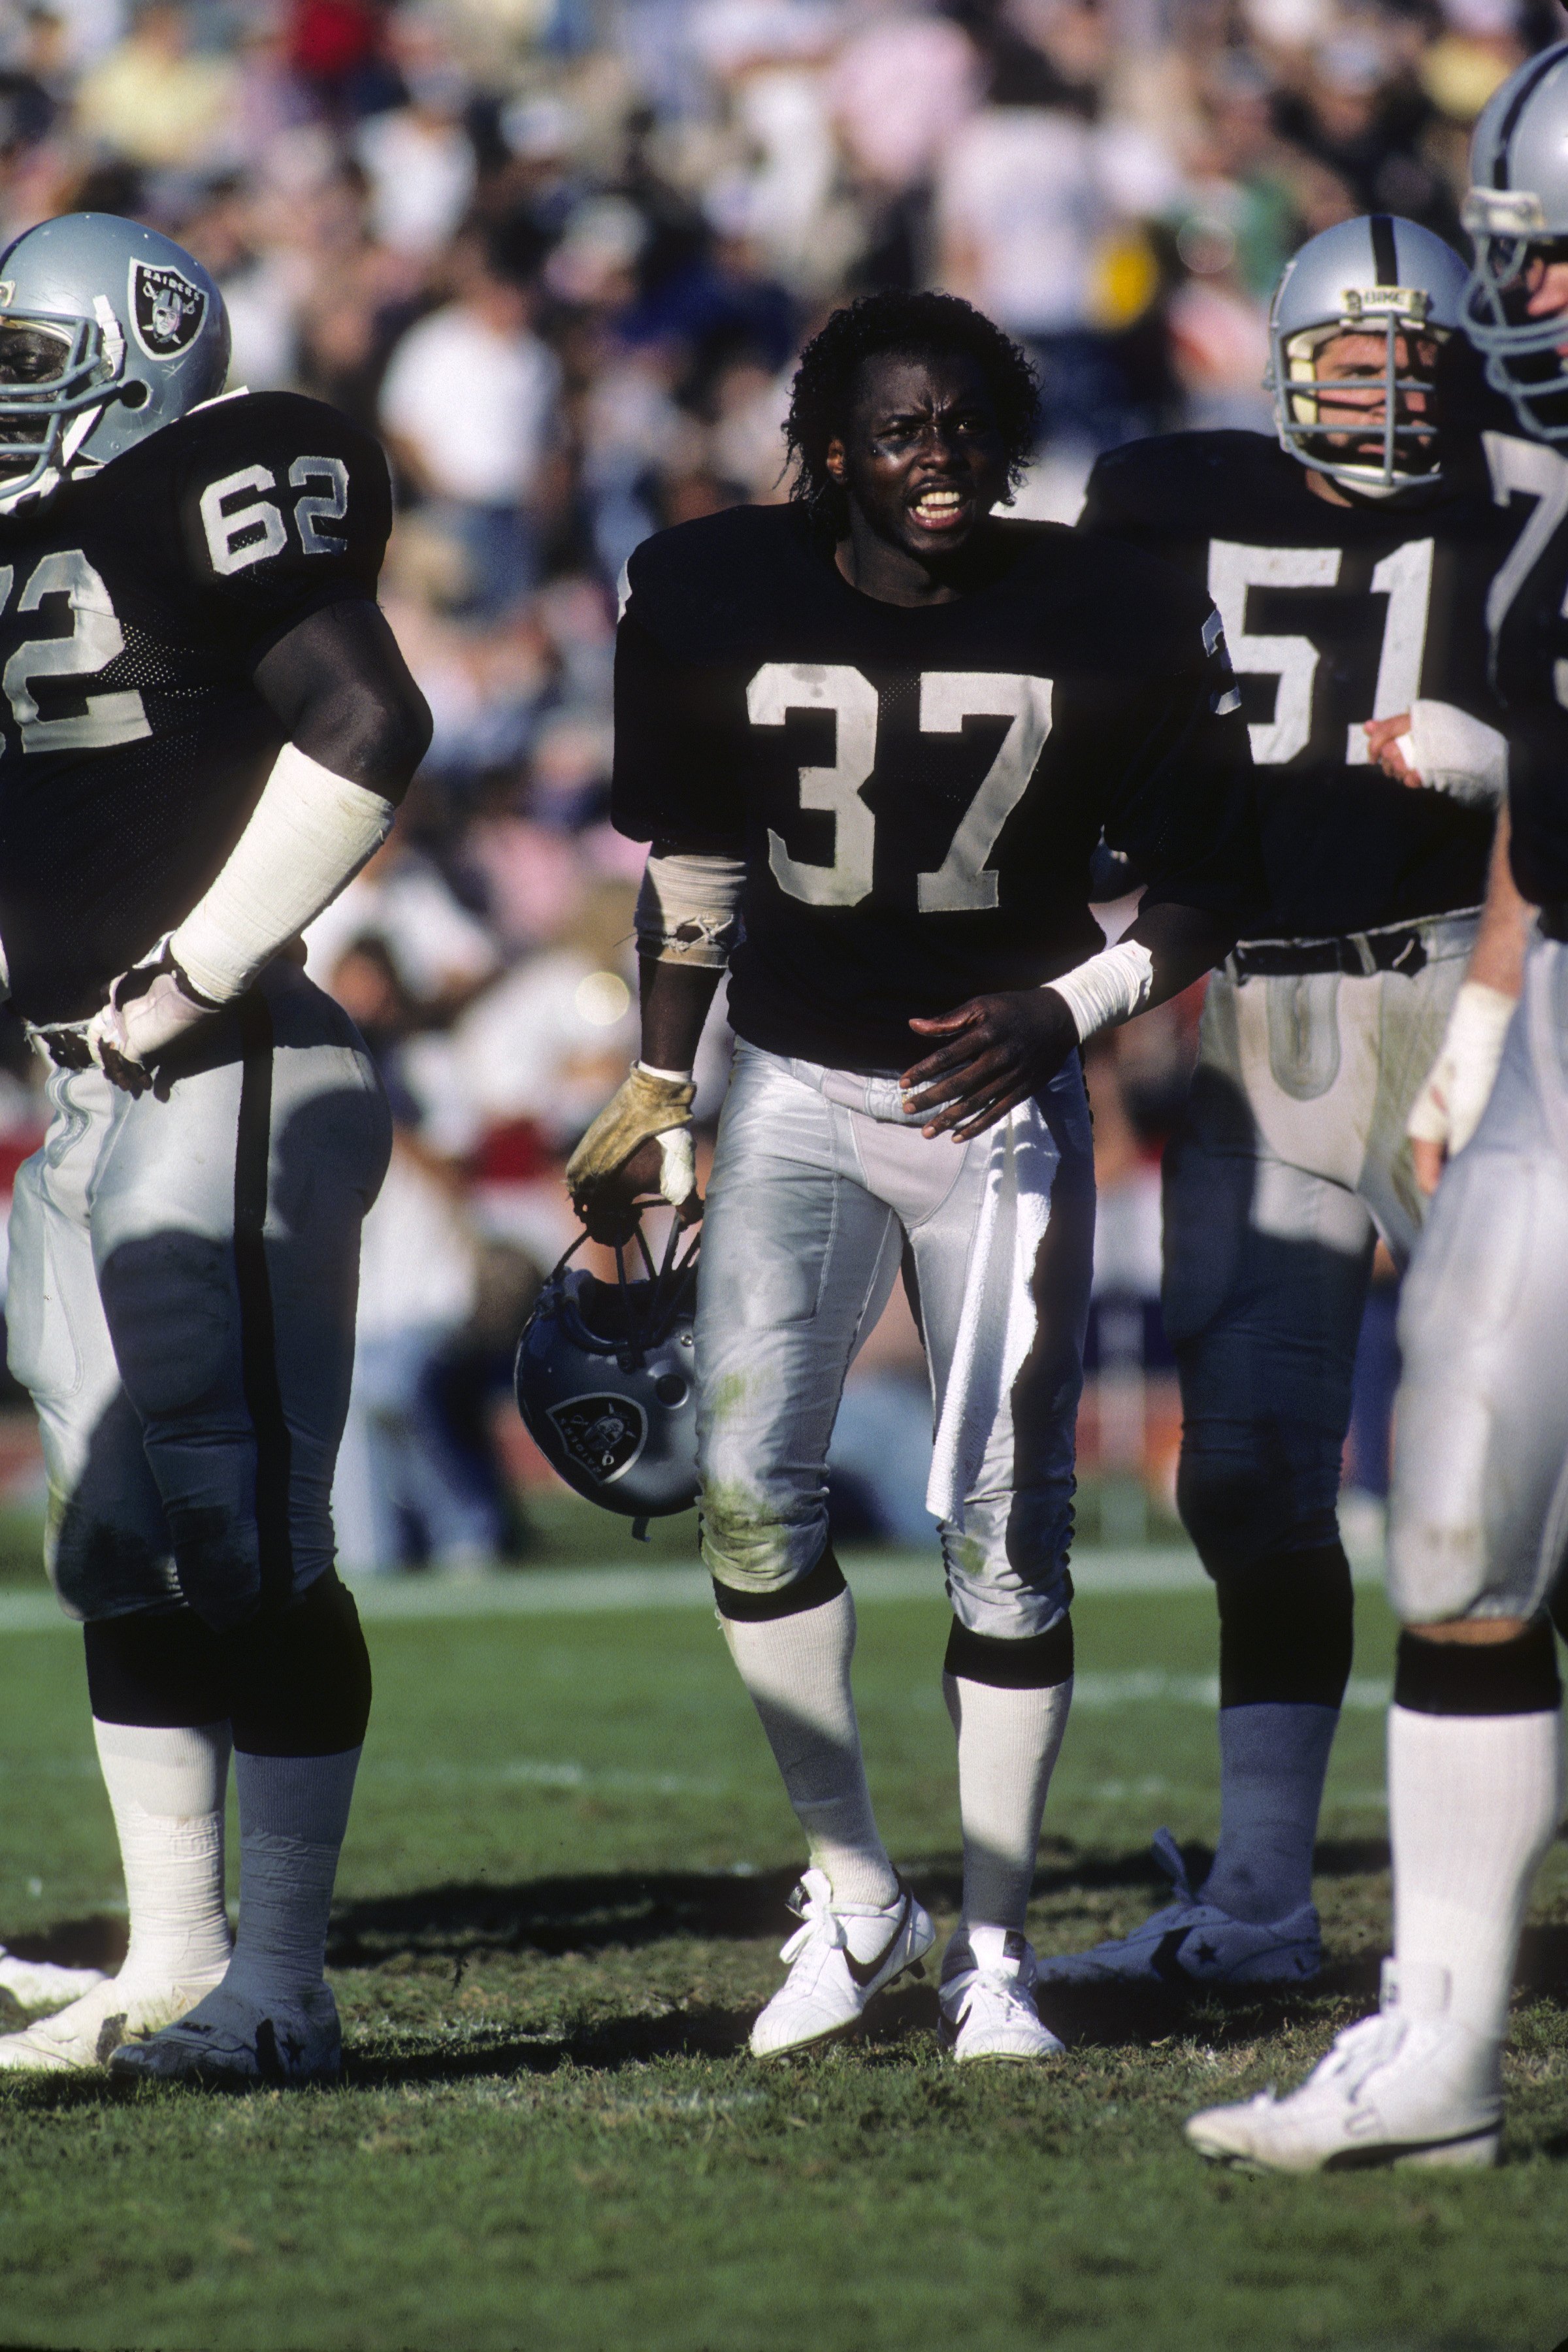 LOS ANGELES - NOVEMBER 13:  Defensive back Lester Hayes #37 of the Los Angeles Raiders looks on from the field during the game against the Denver Broncos at the Los Angeles Memorial Coliseum on November 13, 1983 in Los Angeles, California.  The Raiders wo